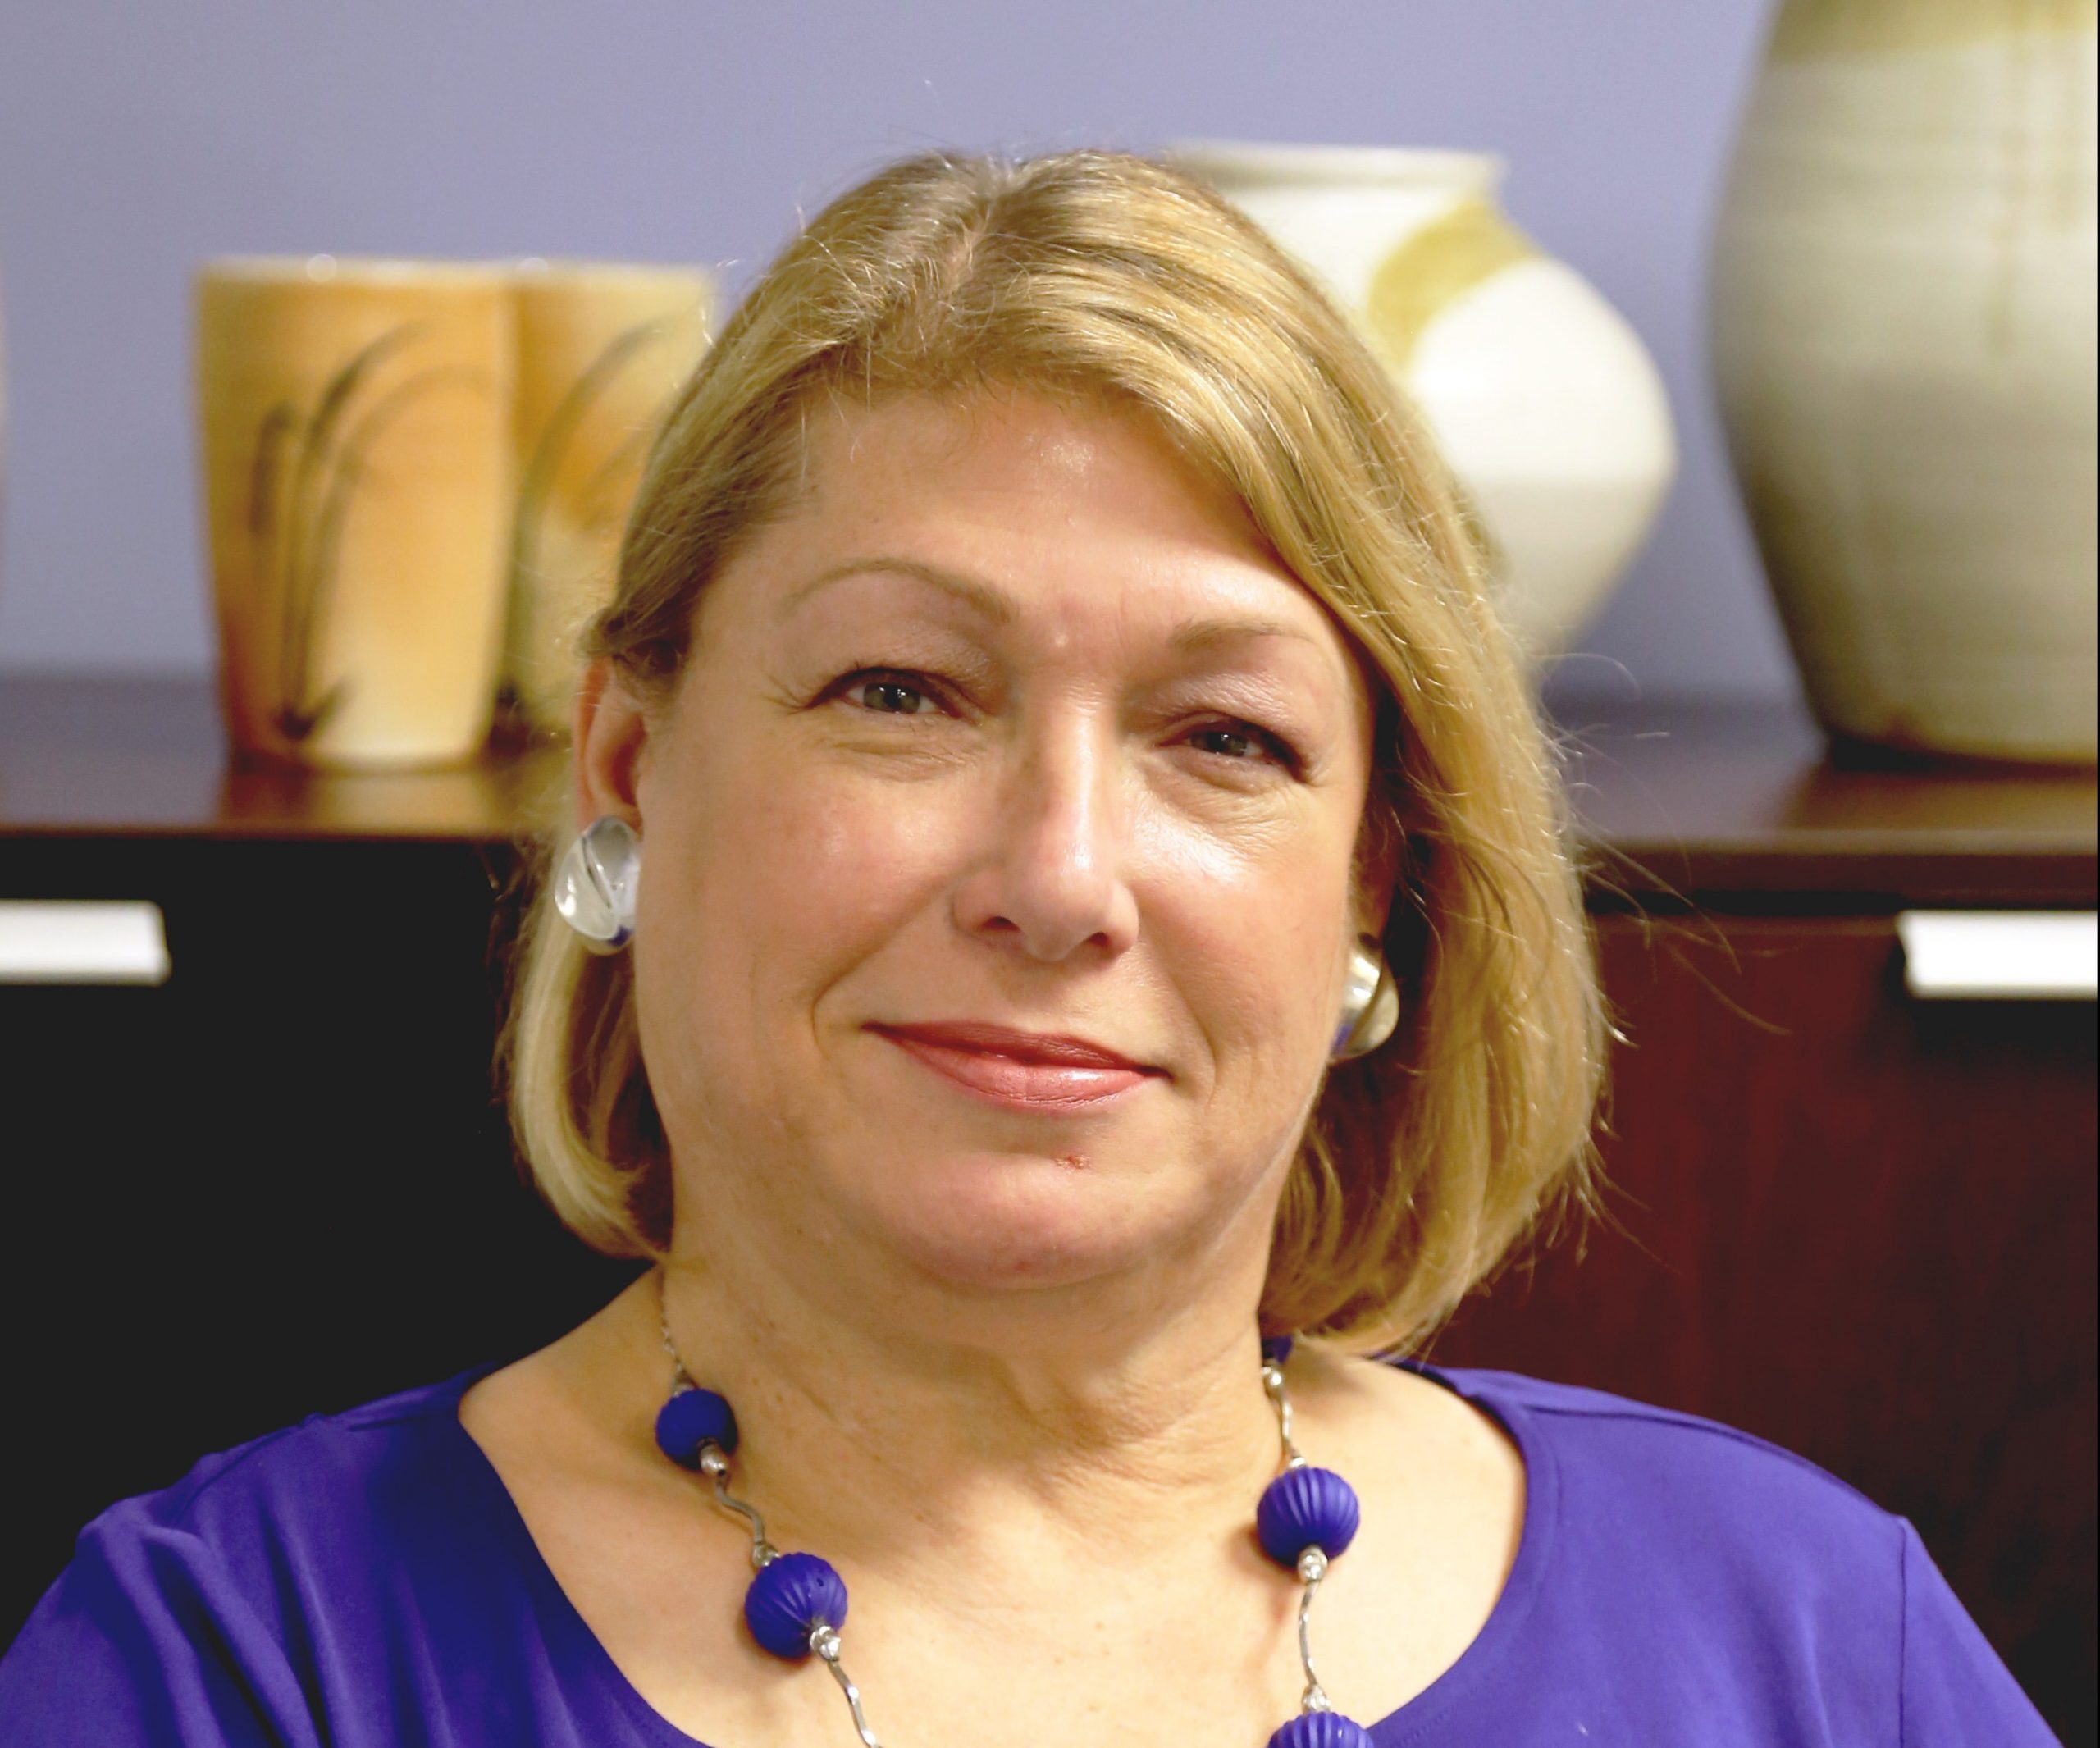 Image of Beth Ziebarth in a purple top sitting in front of a brown cupboard.